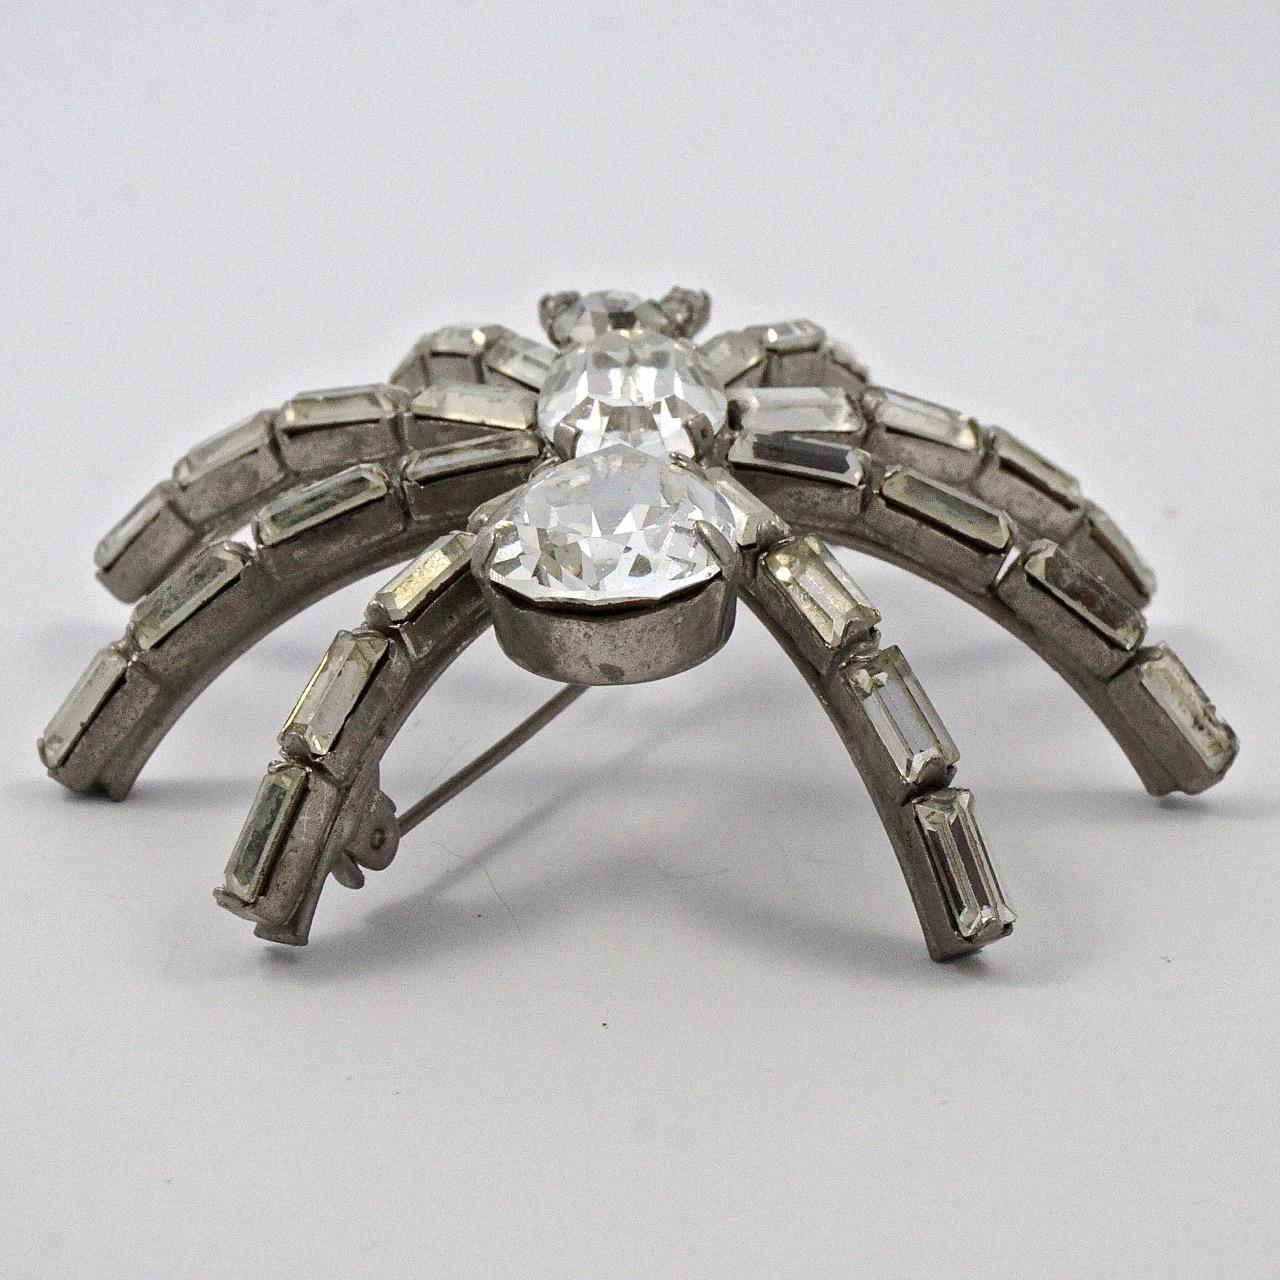 Large Silver Tone and Clear Rhinestone Figural Spider Brooch, circa 1980s 1